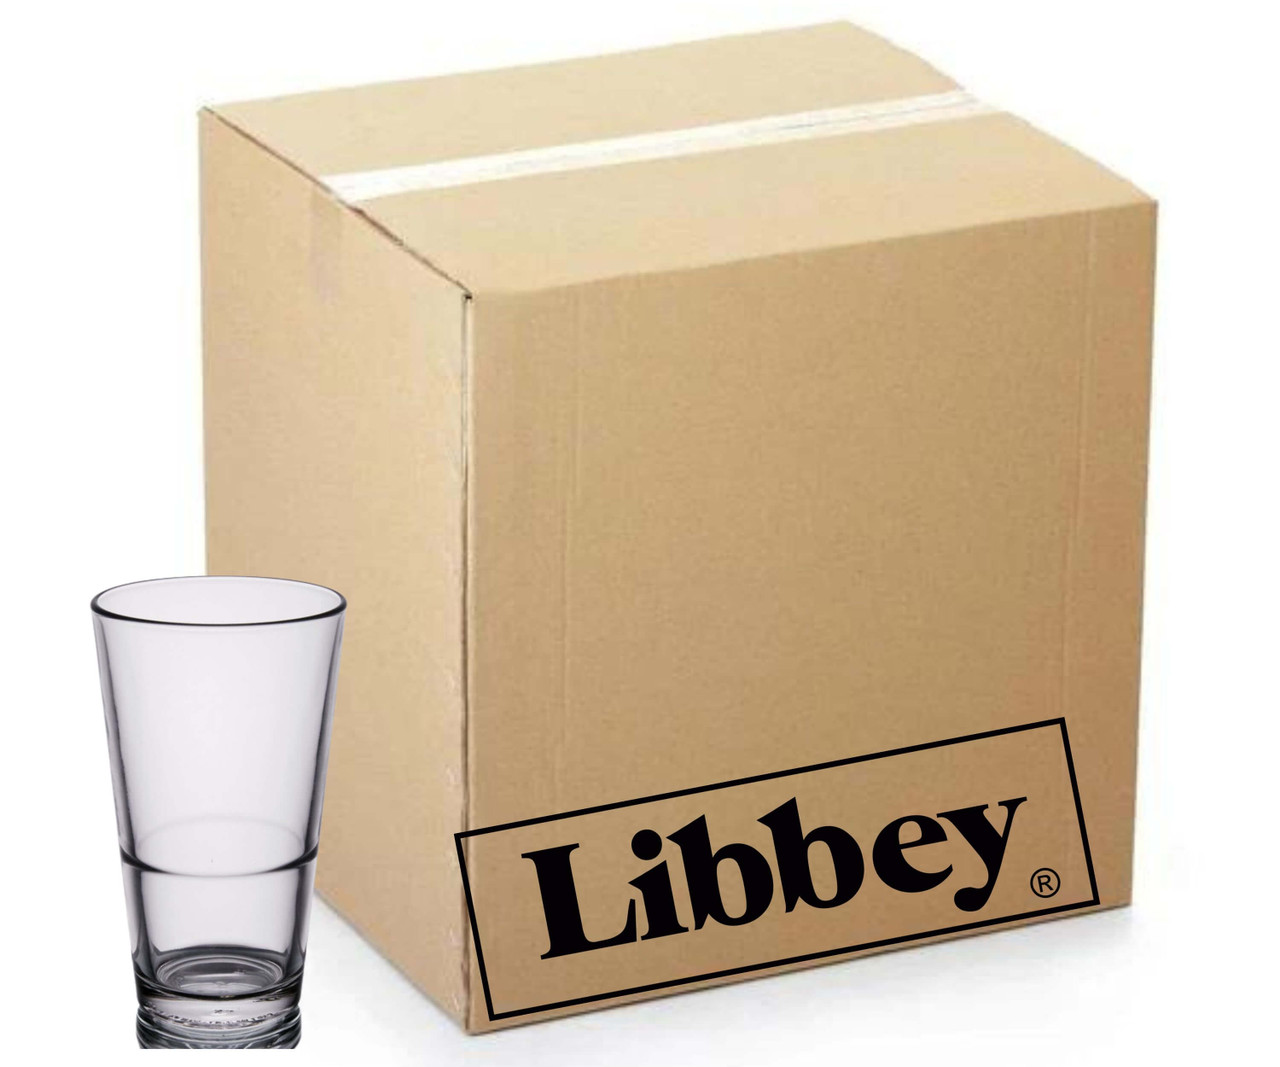 Libbey Restaurant Basics 16 oz. Customizable Rim Tempered Stackable Mixing Glass / Pint Glass - 24/Case - Durable Glassware for Drinks and Cocktails-Chicken Pieces